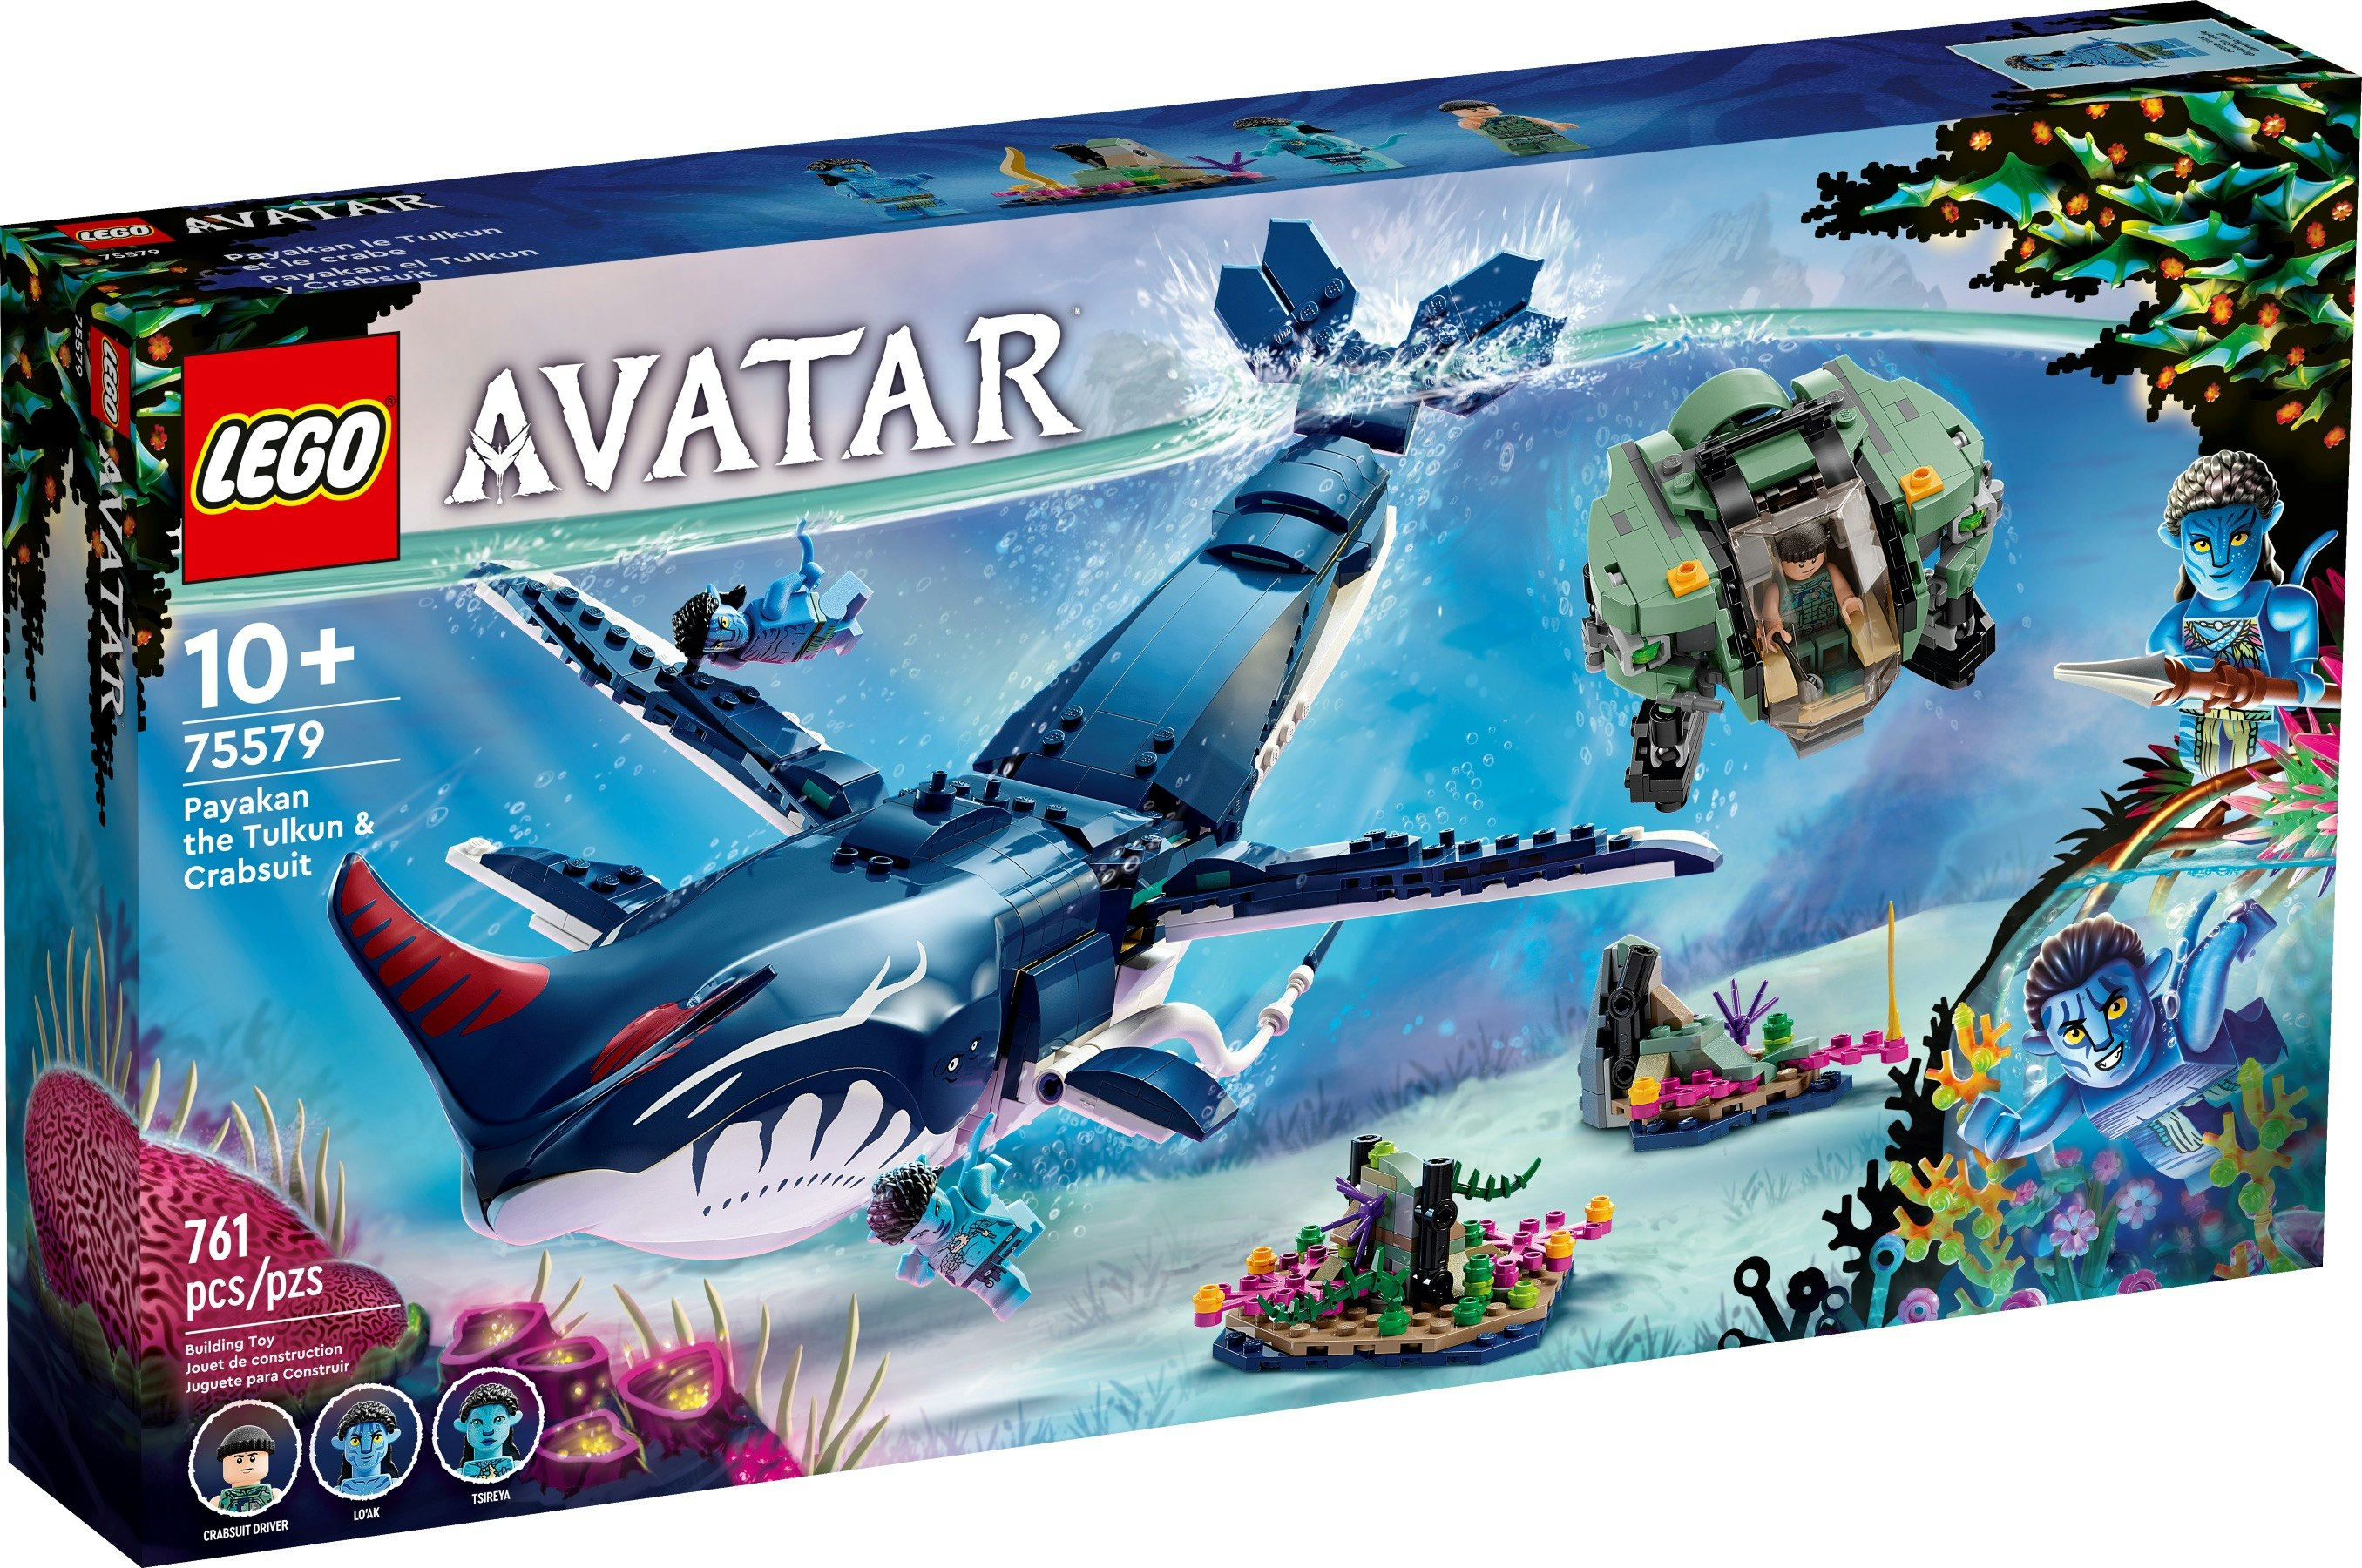 Amazoncom LEGO Avatar Ilu Discovery 75575 The Way of Water Movie  Building Toy Ocean Set AnimalLike Underwater Creature Figure Collectible  Display Idea for Kids and Movie Fans  Toys  Games